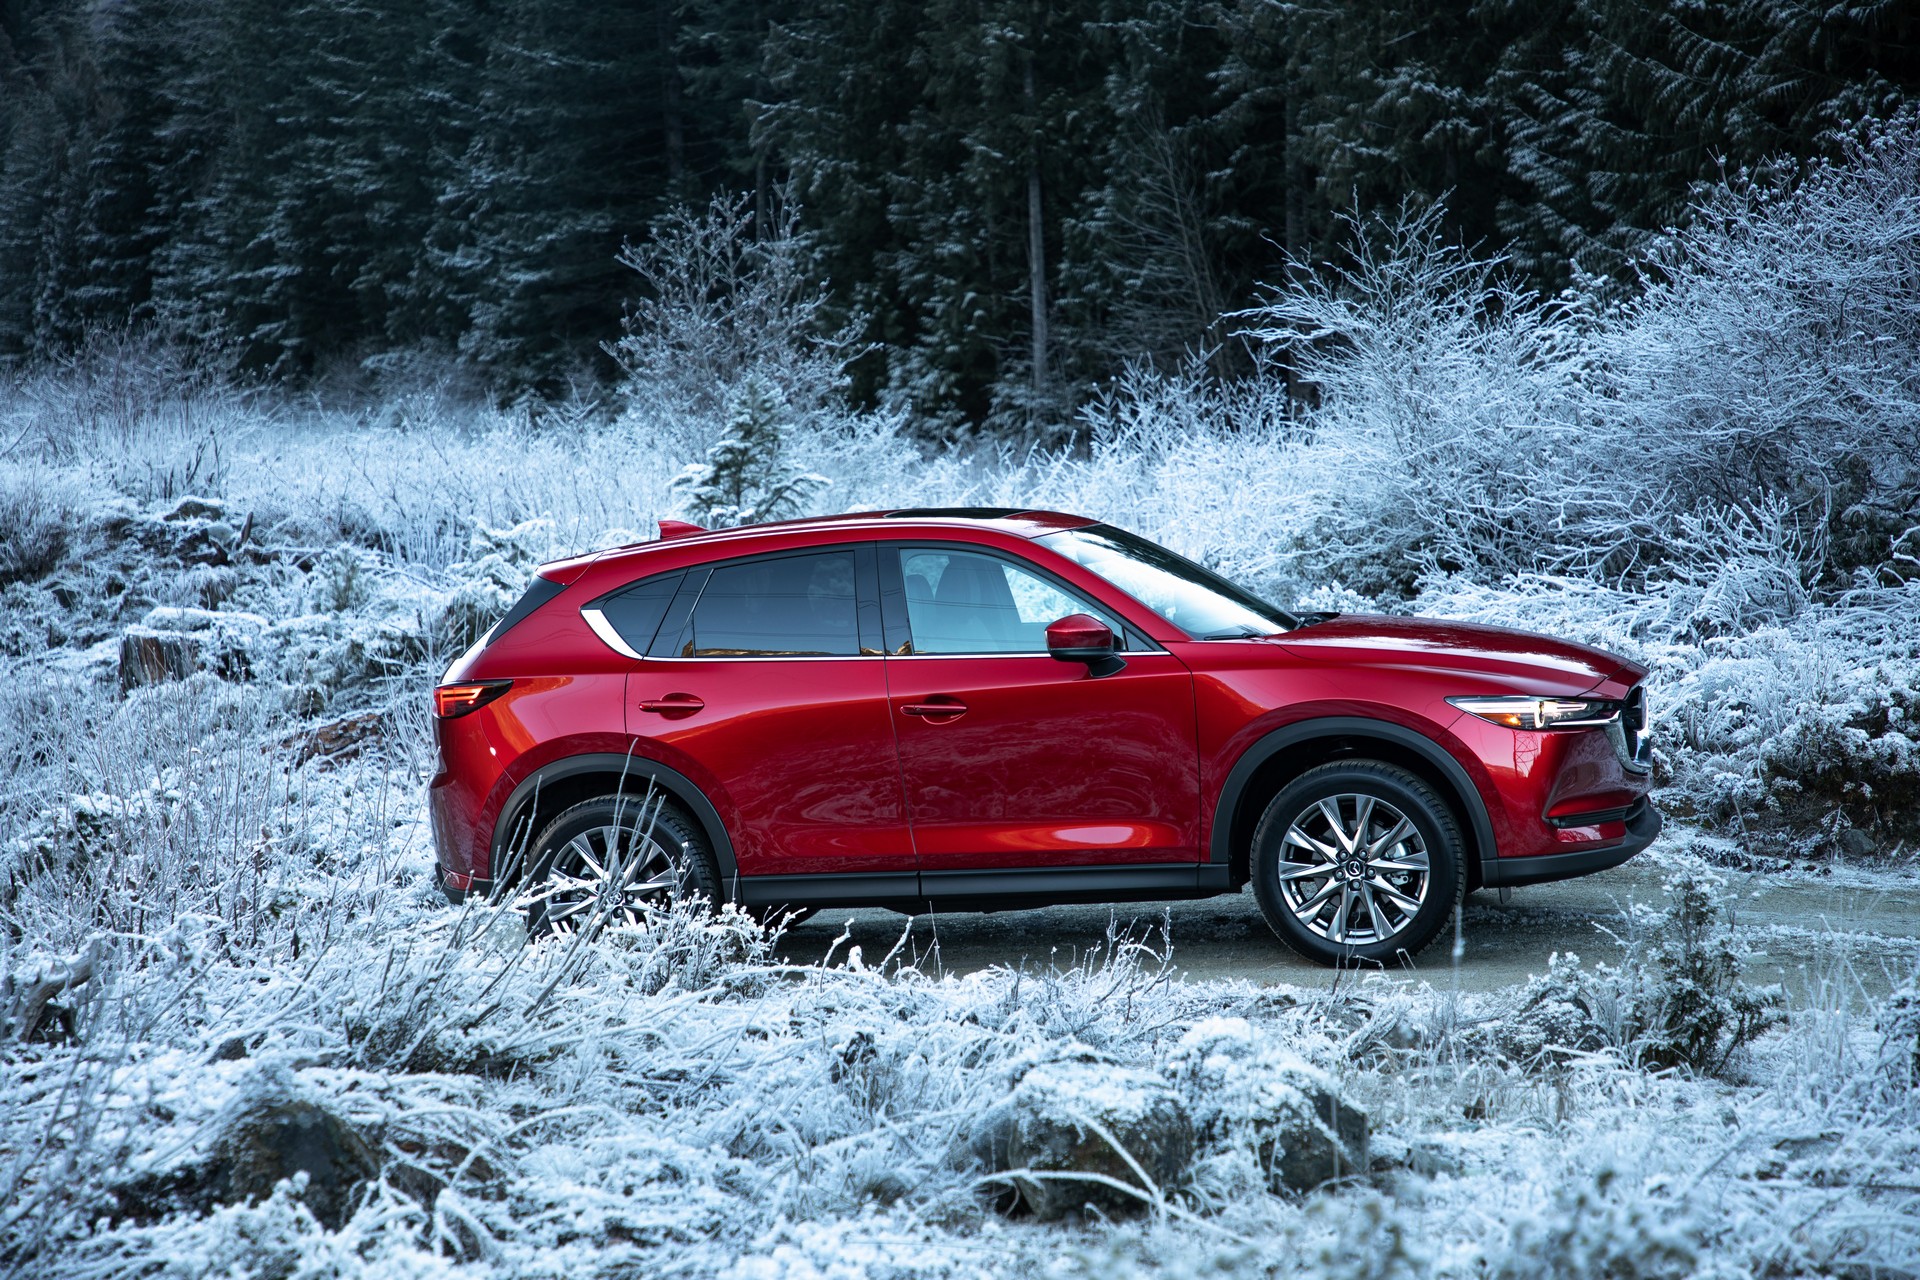 2020 Mazda CX-5 Gains More Power And Equipment, But Prices Jump By $740 ...